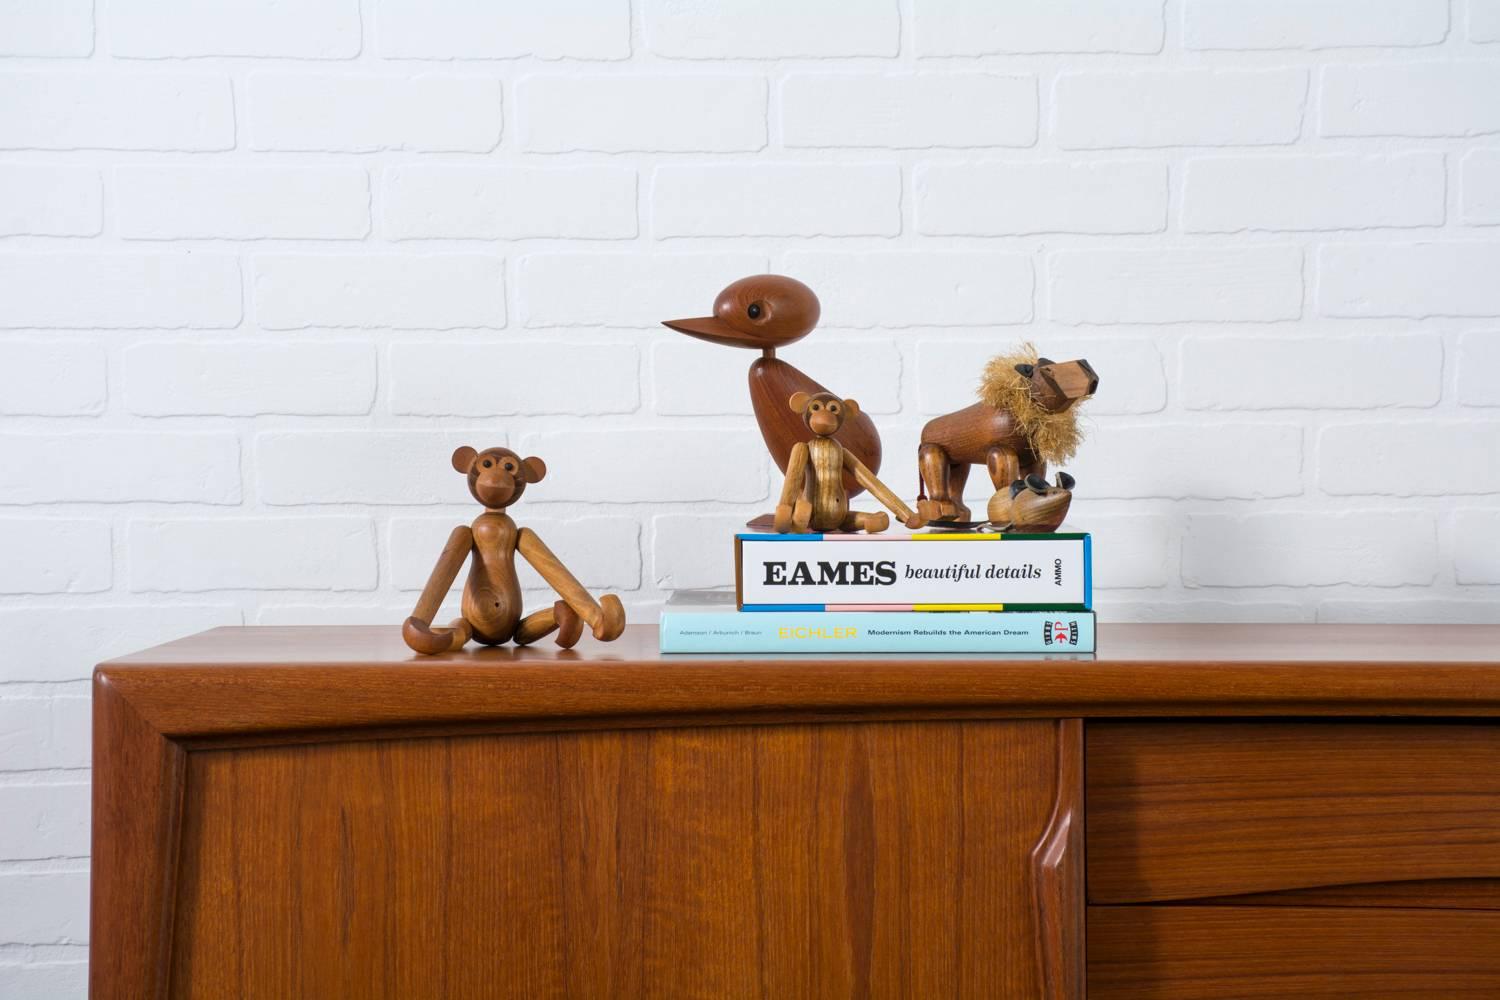 This is a set of six Mid-Century Modern articulating wood animal toys in the manner of Kay Bojensen, circa 1960s. They include a duck, two monkeys, a lion, and two mice. These animals are teak and oak with leather and rope details. The two monkeys